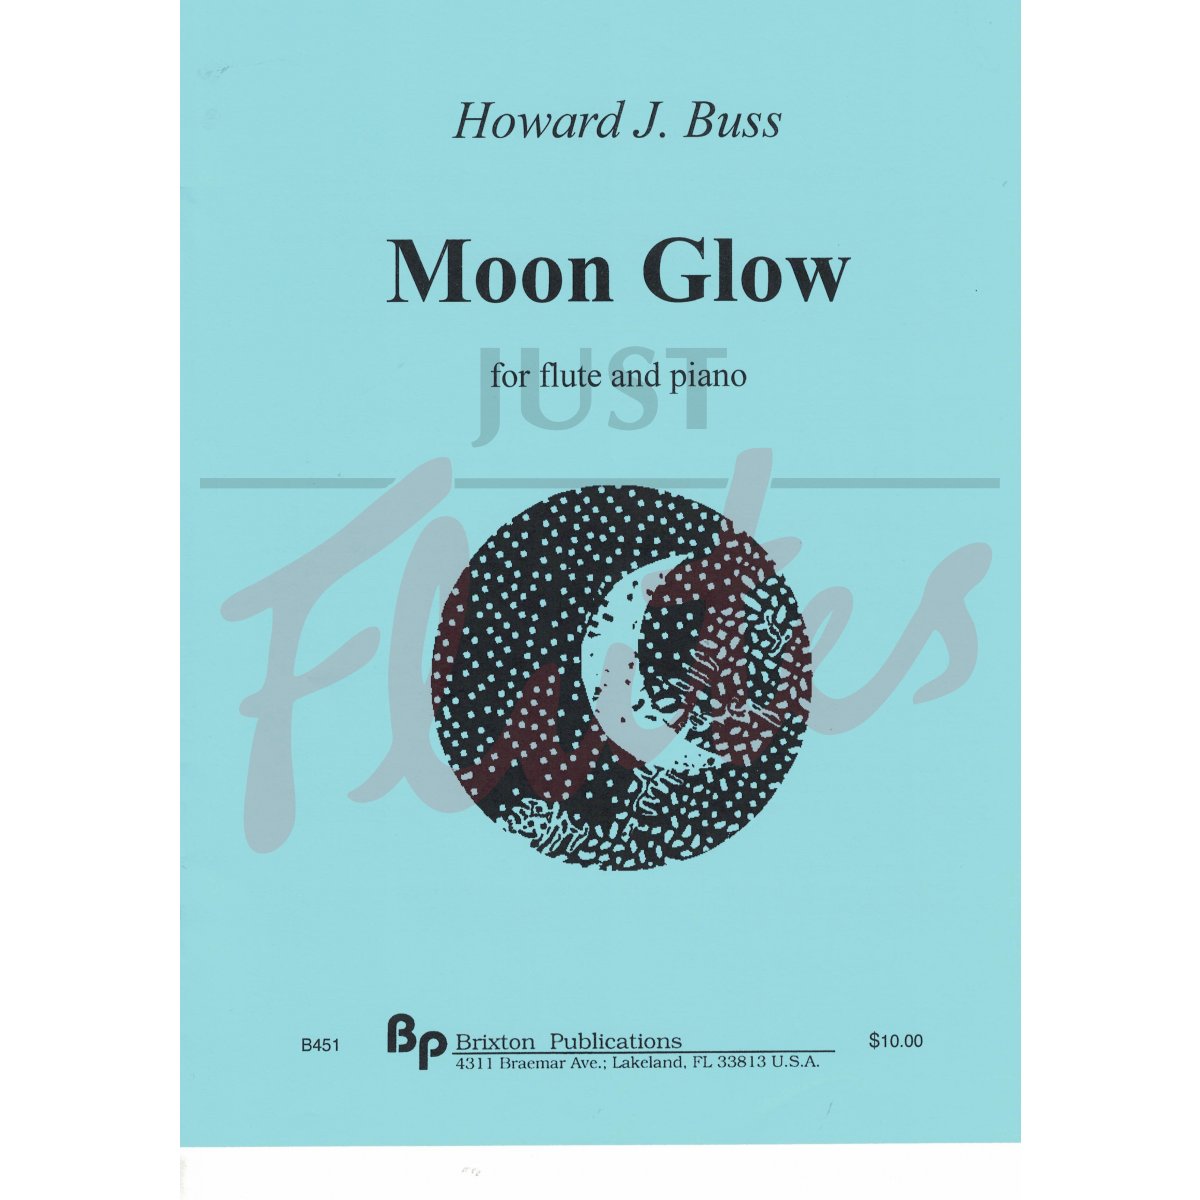 Moon Glow for Flute and Piano